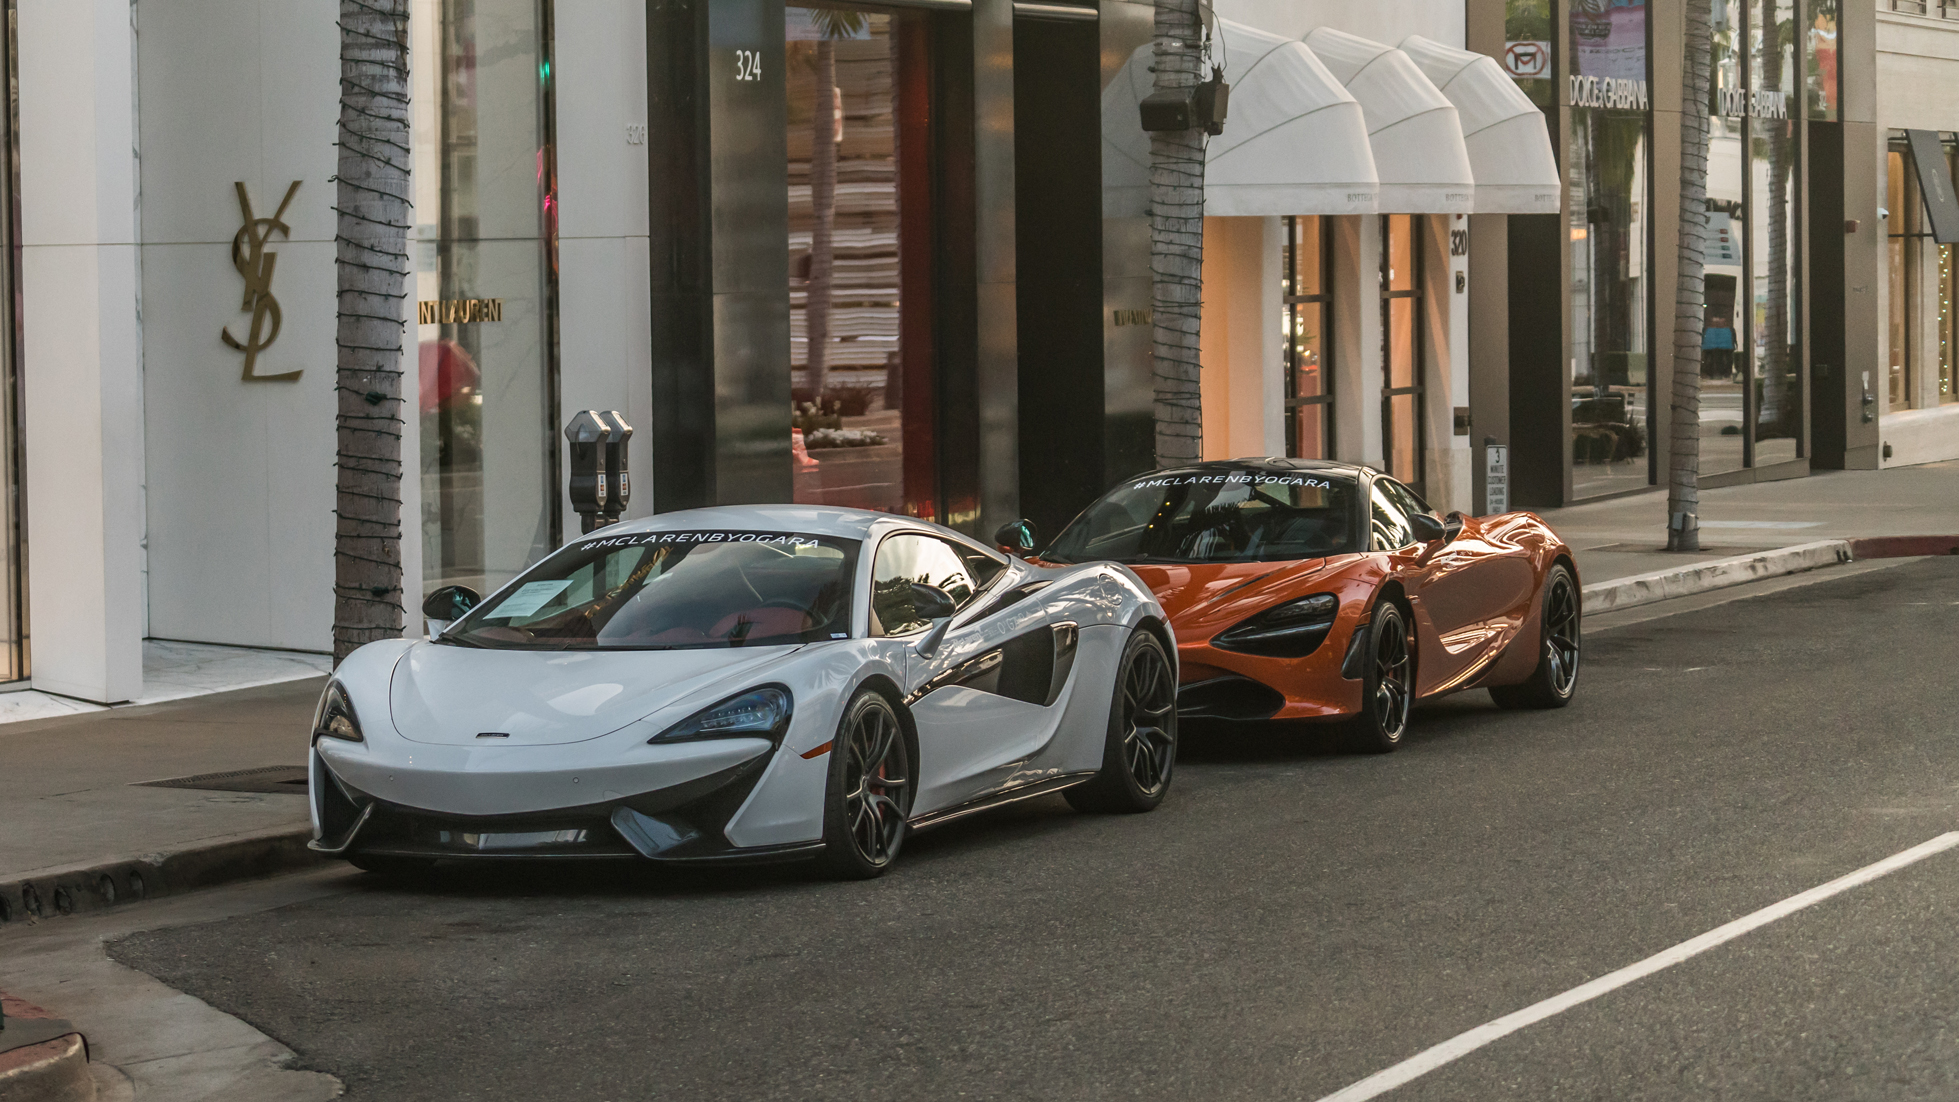 RODEO DRIVE TAKEOVER – MCLAREN BEVERLY HILLS